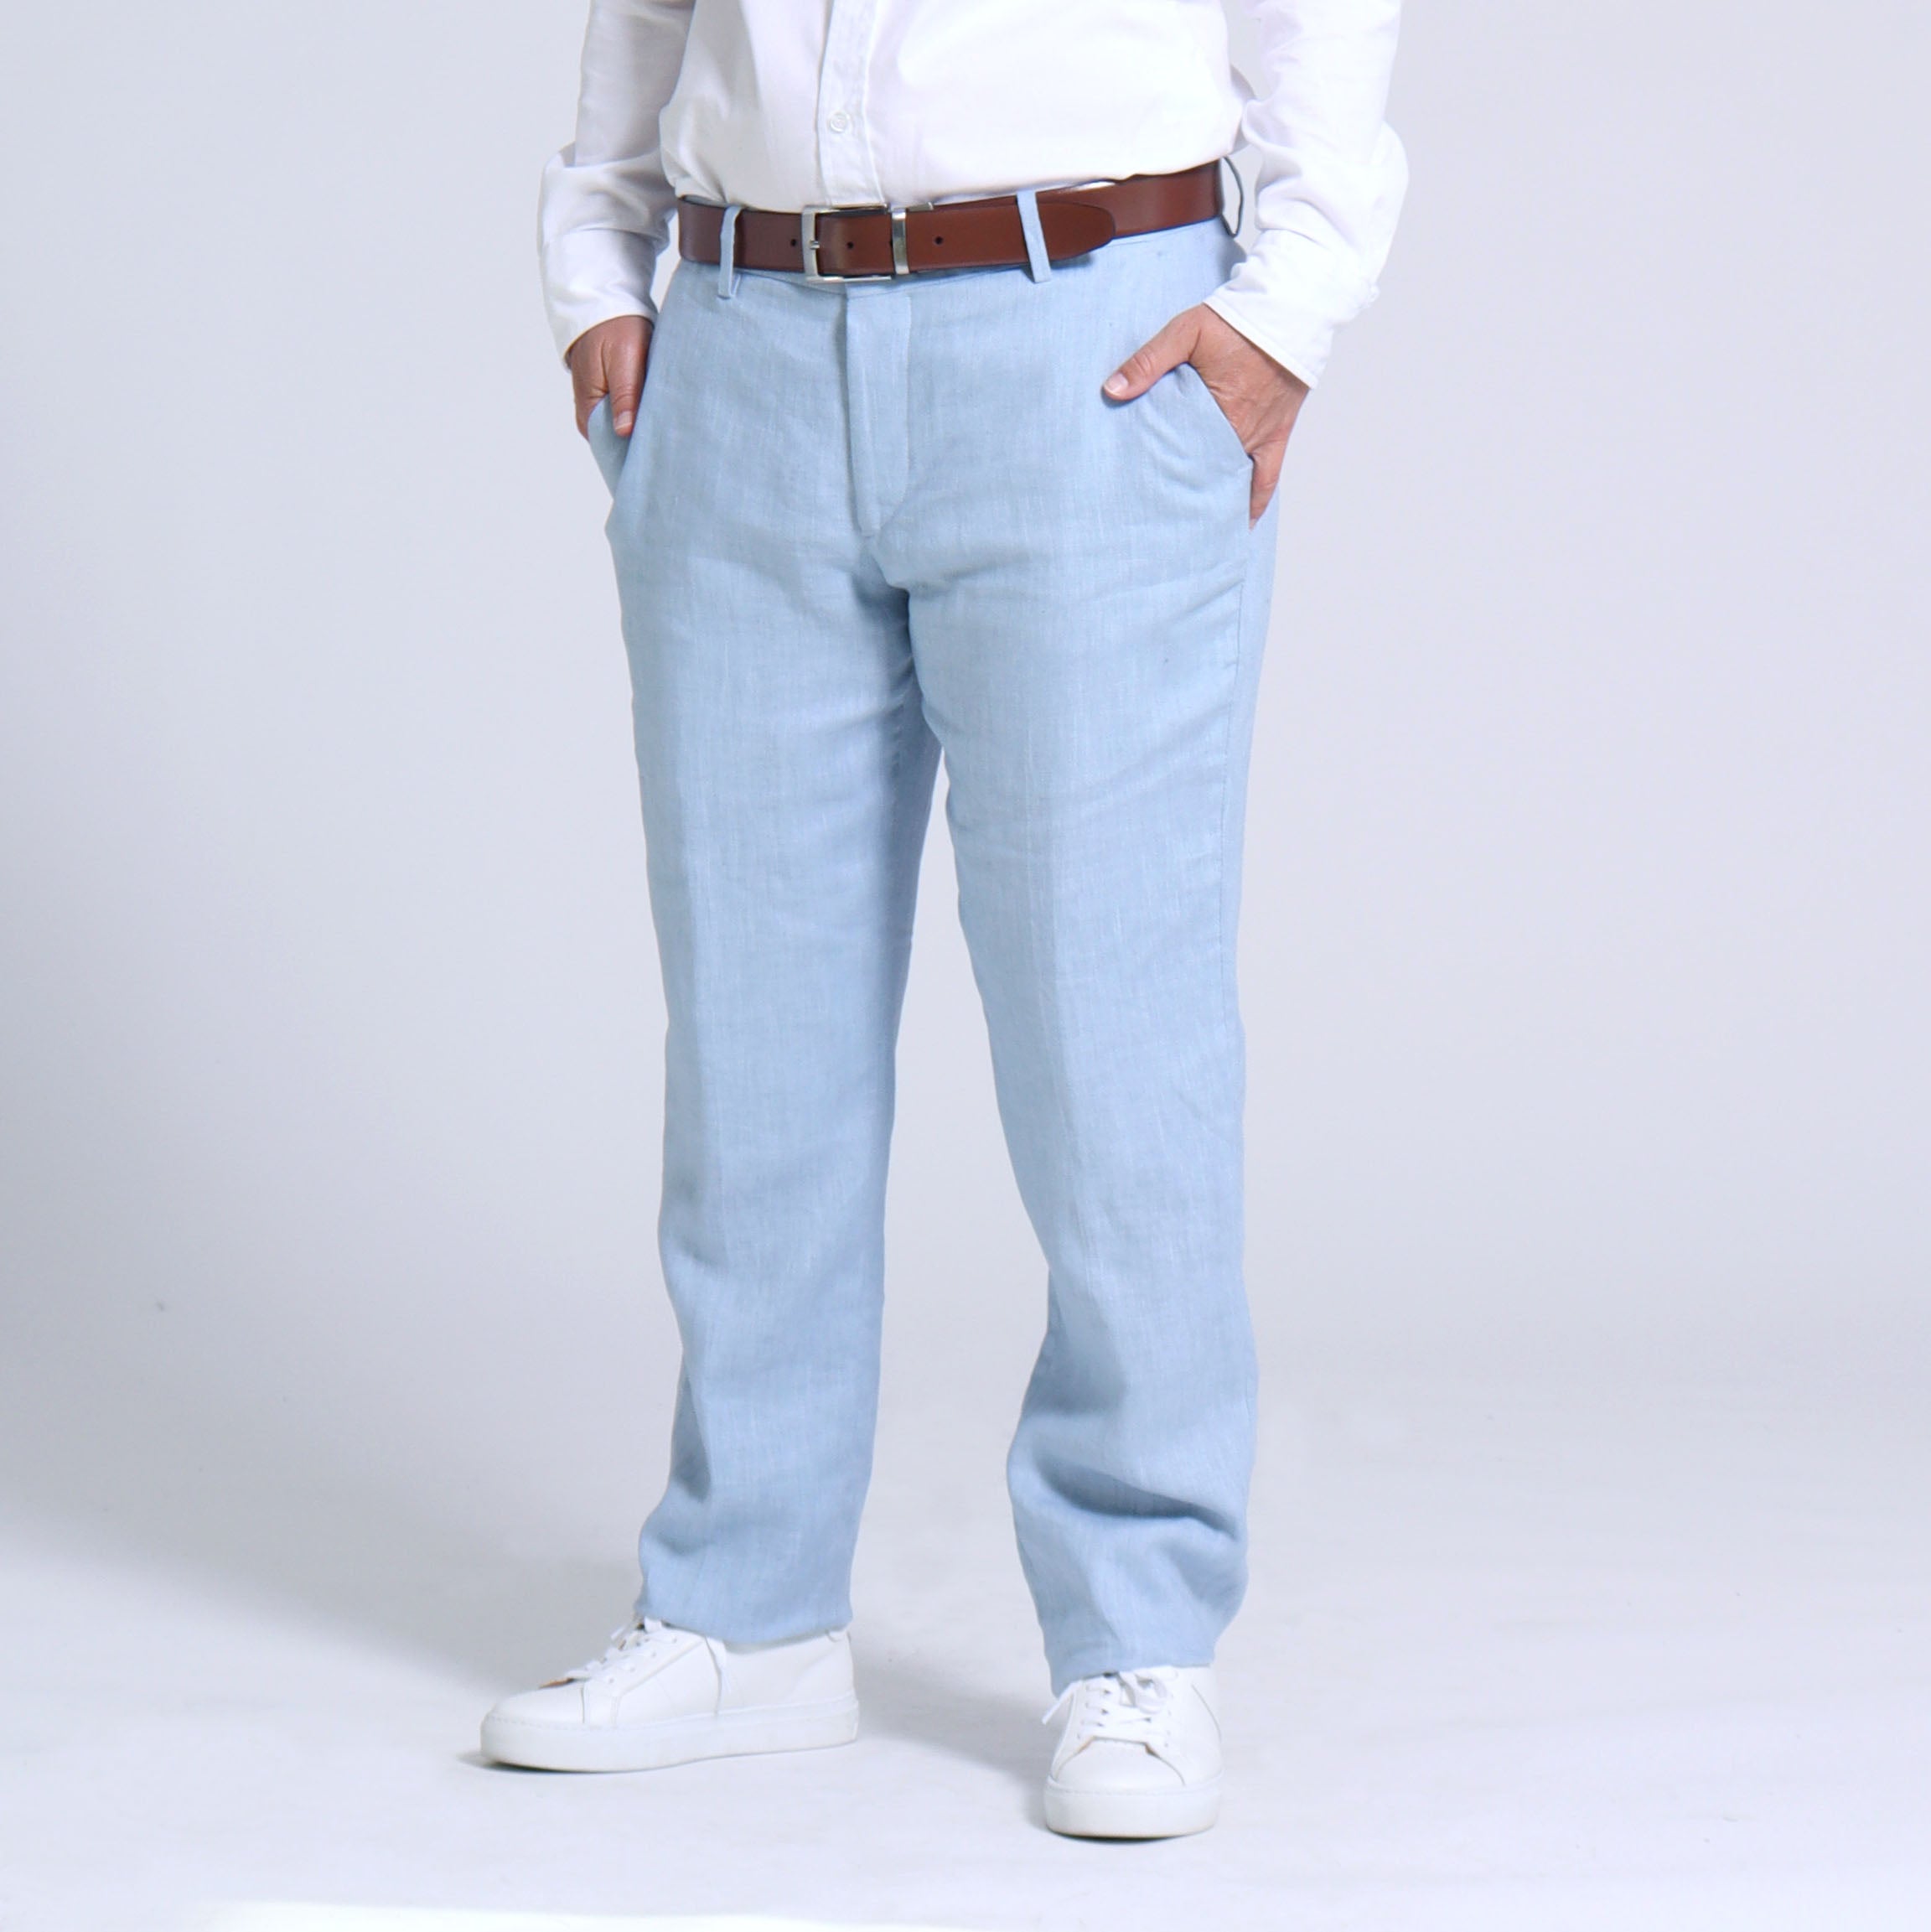 Premium Photo | A man stands in a dark room wearing a white shirt and light  blue pants.